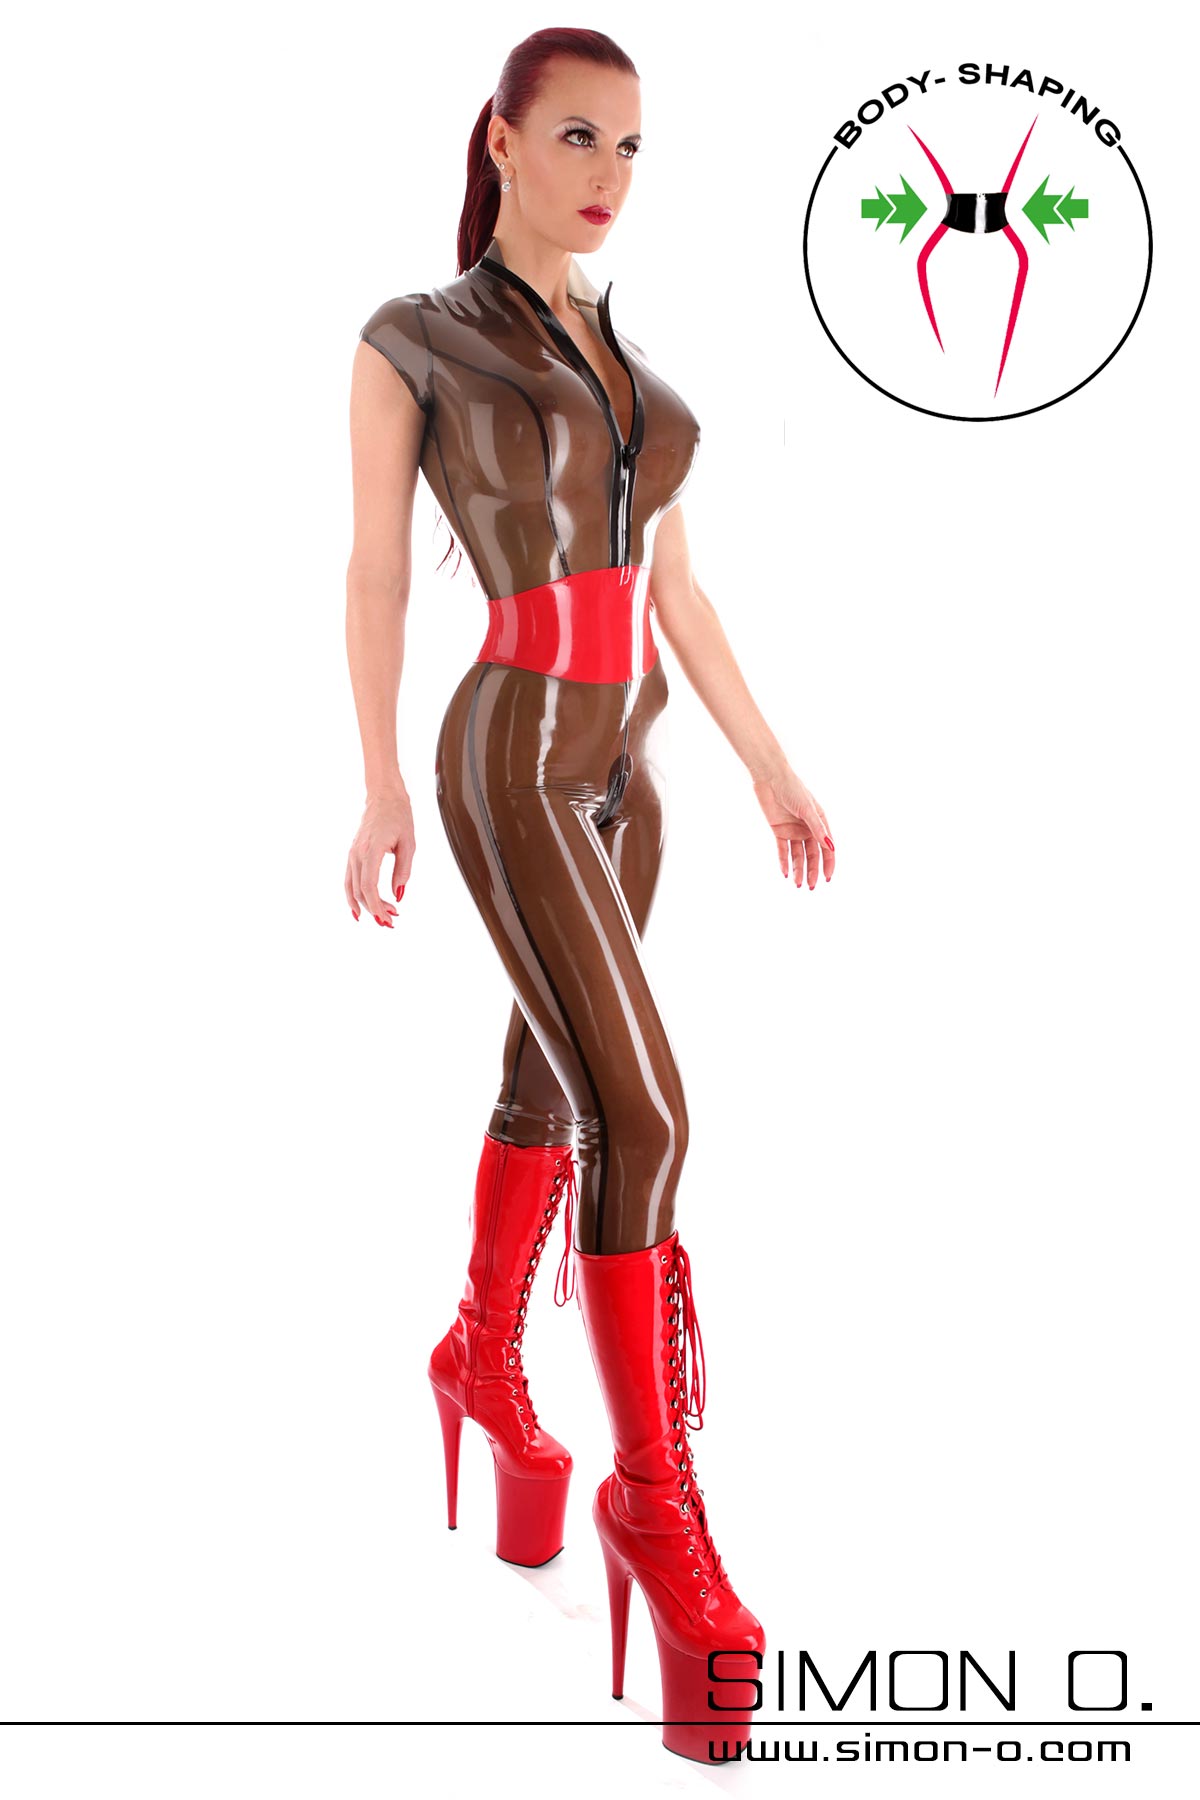 Black transparent latex bodysuit with zipper in the front and red waist belt seen from behind